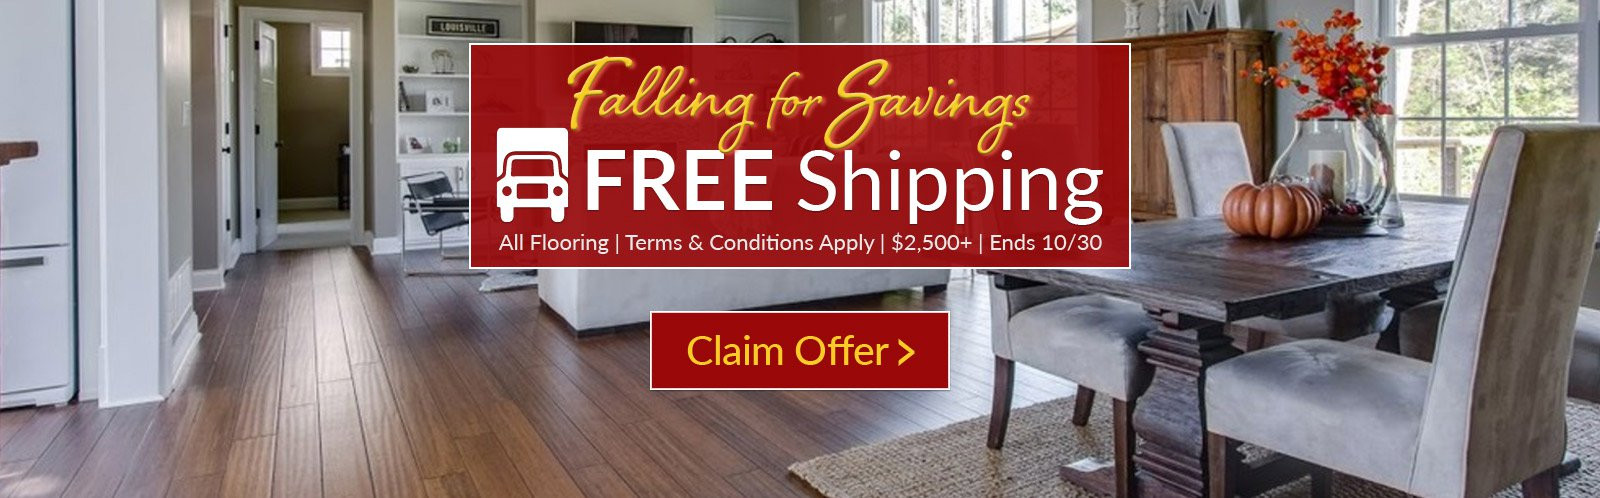 15 Amazing Direct Hardwood Flooring Reviews 2024 free download direct hardwood flooring reviews of green building construction materials and home decor cali bamboo pertaining to your shopping cart is empty